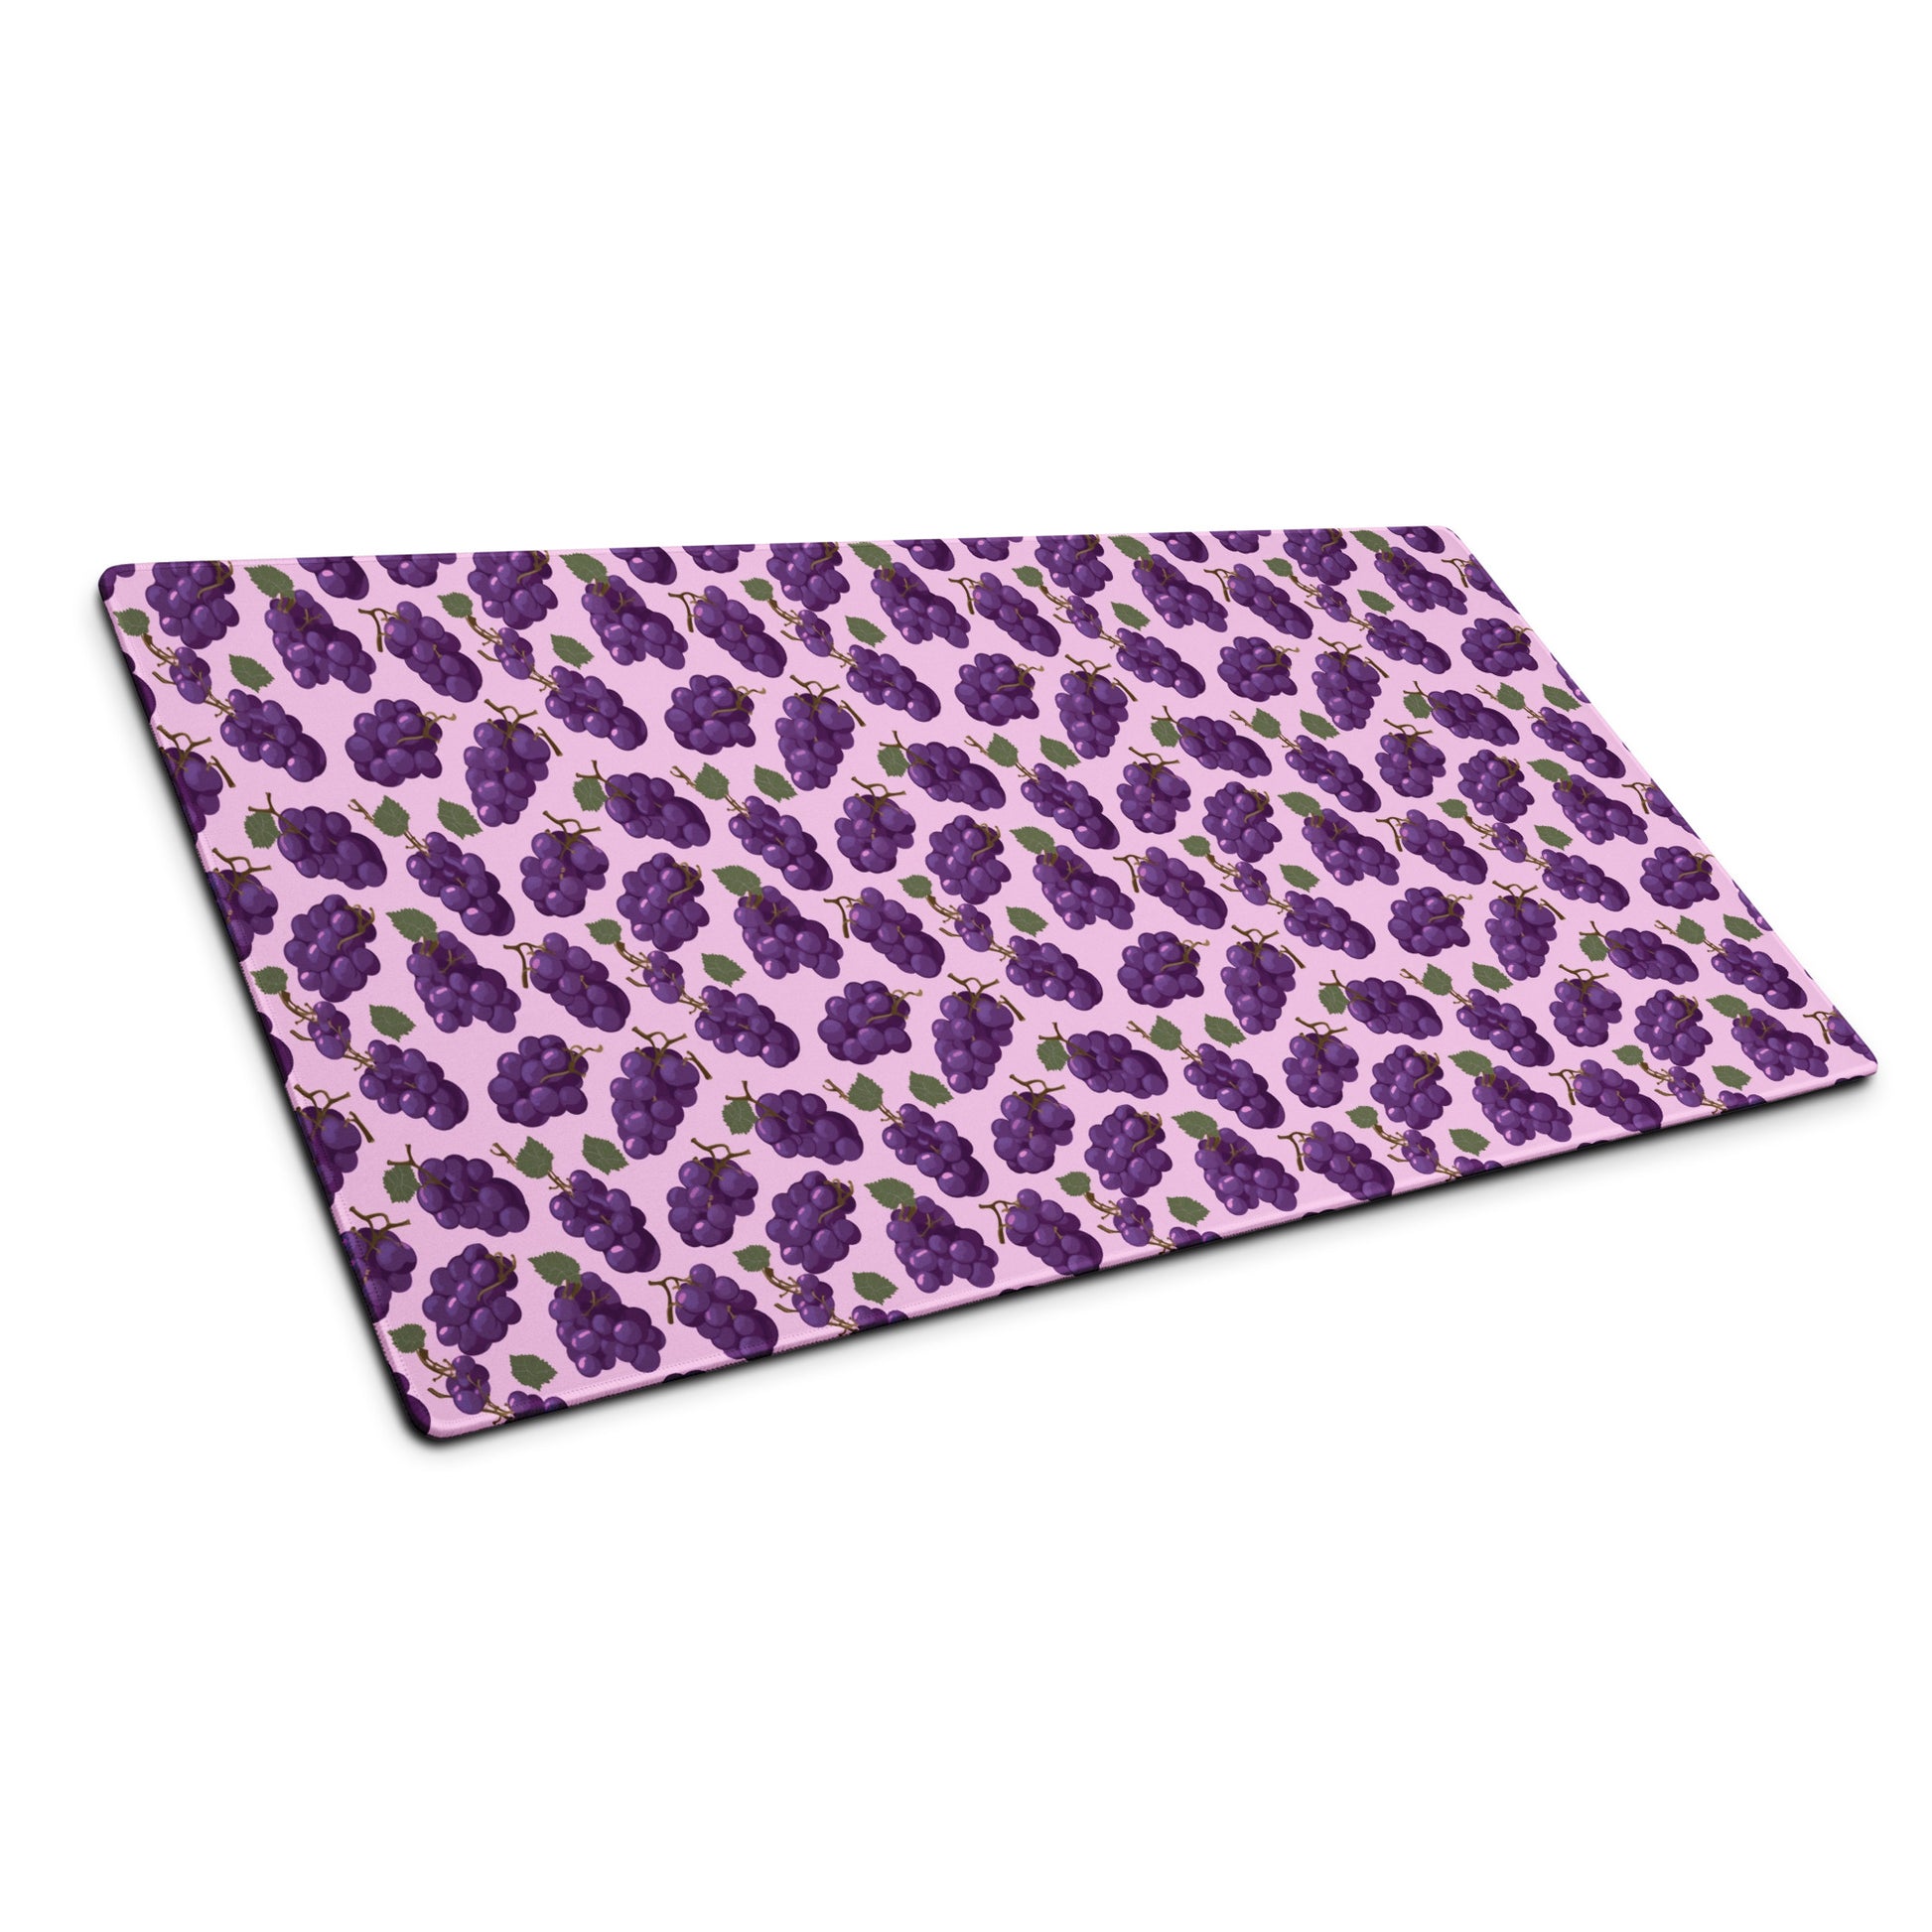 A 36" x 18" desk pad with bushels of grapes all over it shown at an angle. Purple in color.